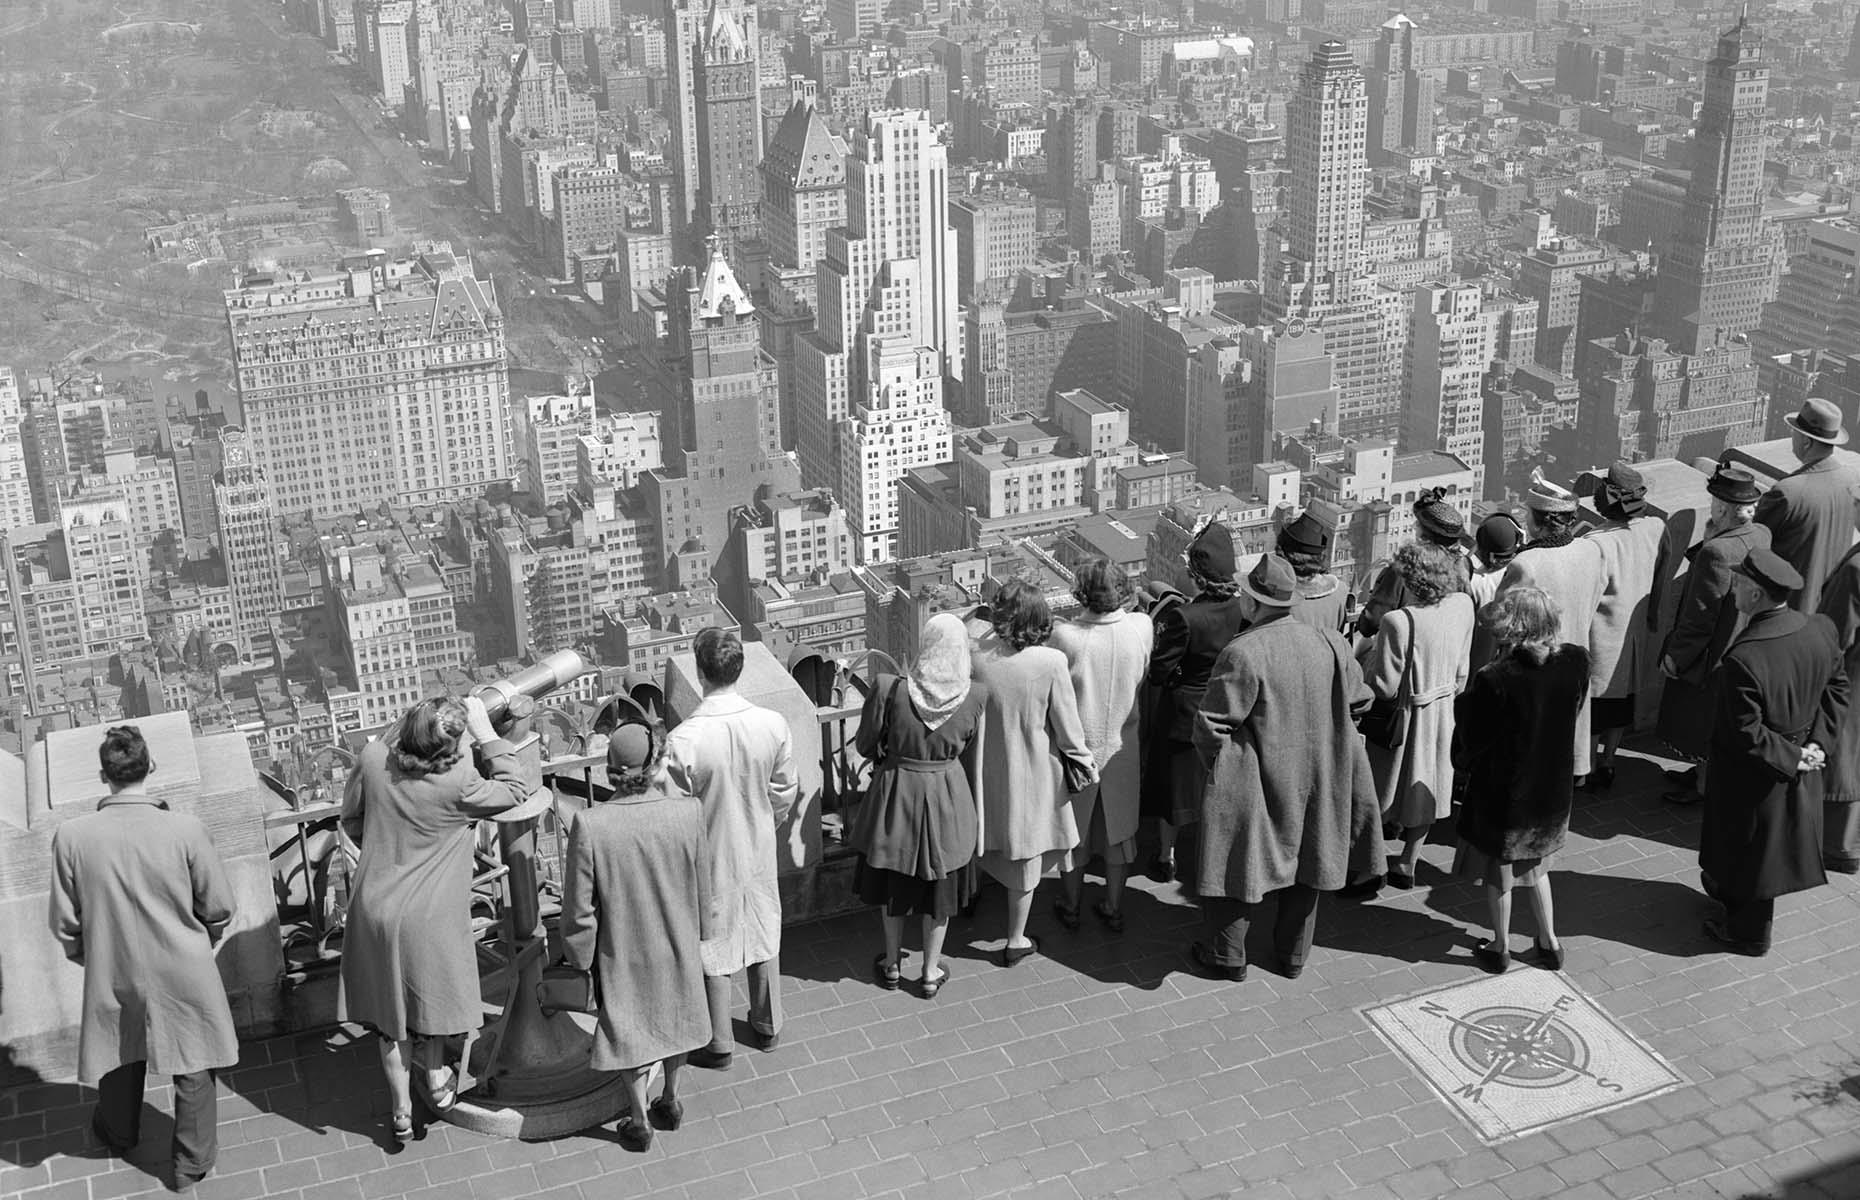 Famous for its abundance of skyscrapers, which were still a rarity in Europe, New York City continued to attract millions of visitors in the post-war era. Just like the travelers of today, these visitors from the 1940s line the edge of the observation deck at 30 Rockefeller Plaza (formerly the RCA Building), looking north towards Central Park, with the breathtaking Manhattan skyline surrounding it.